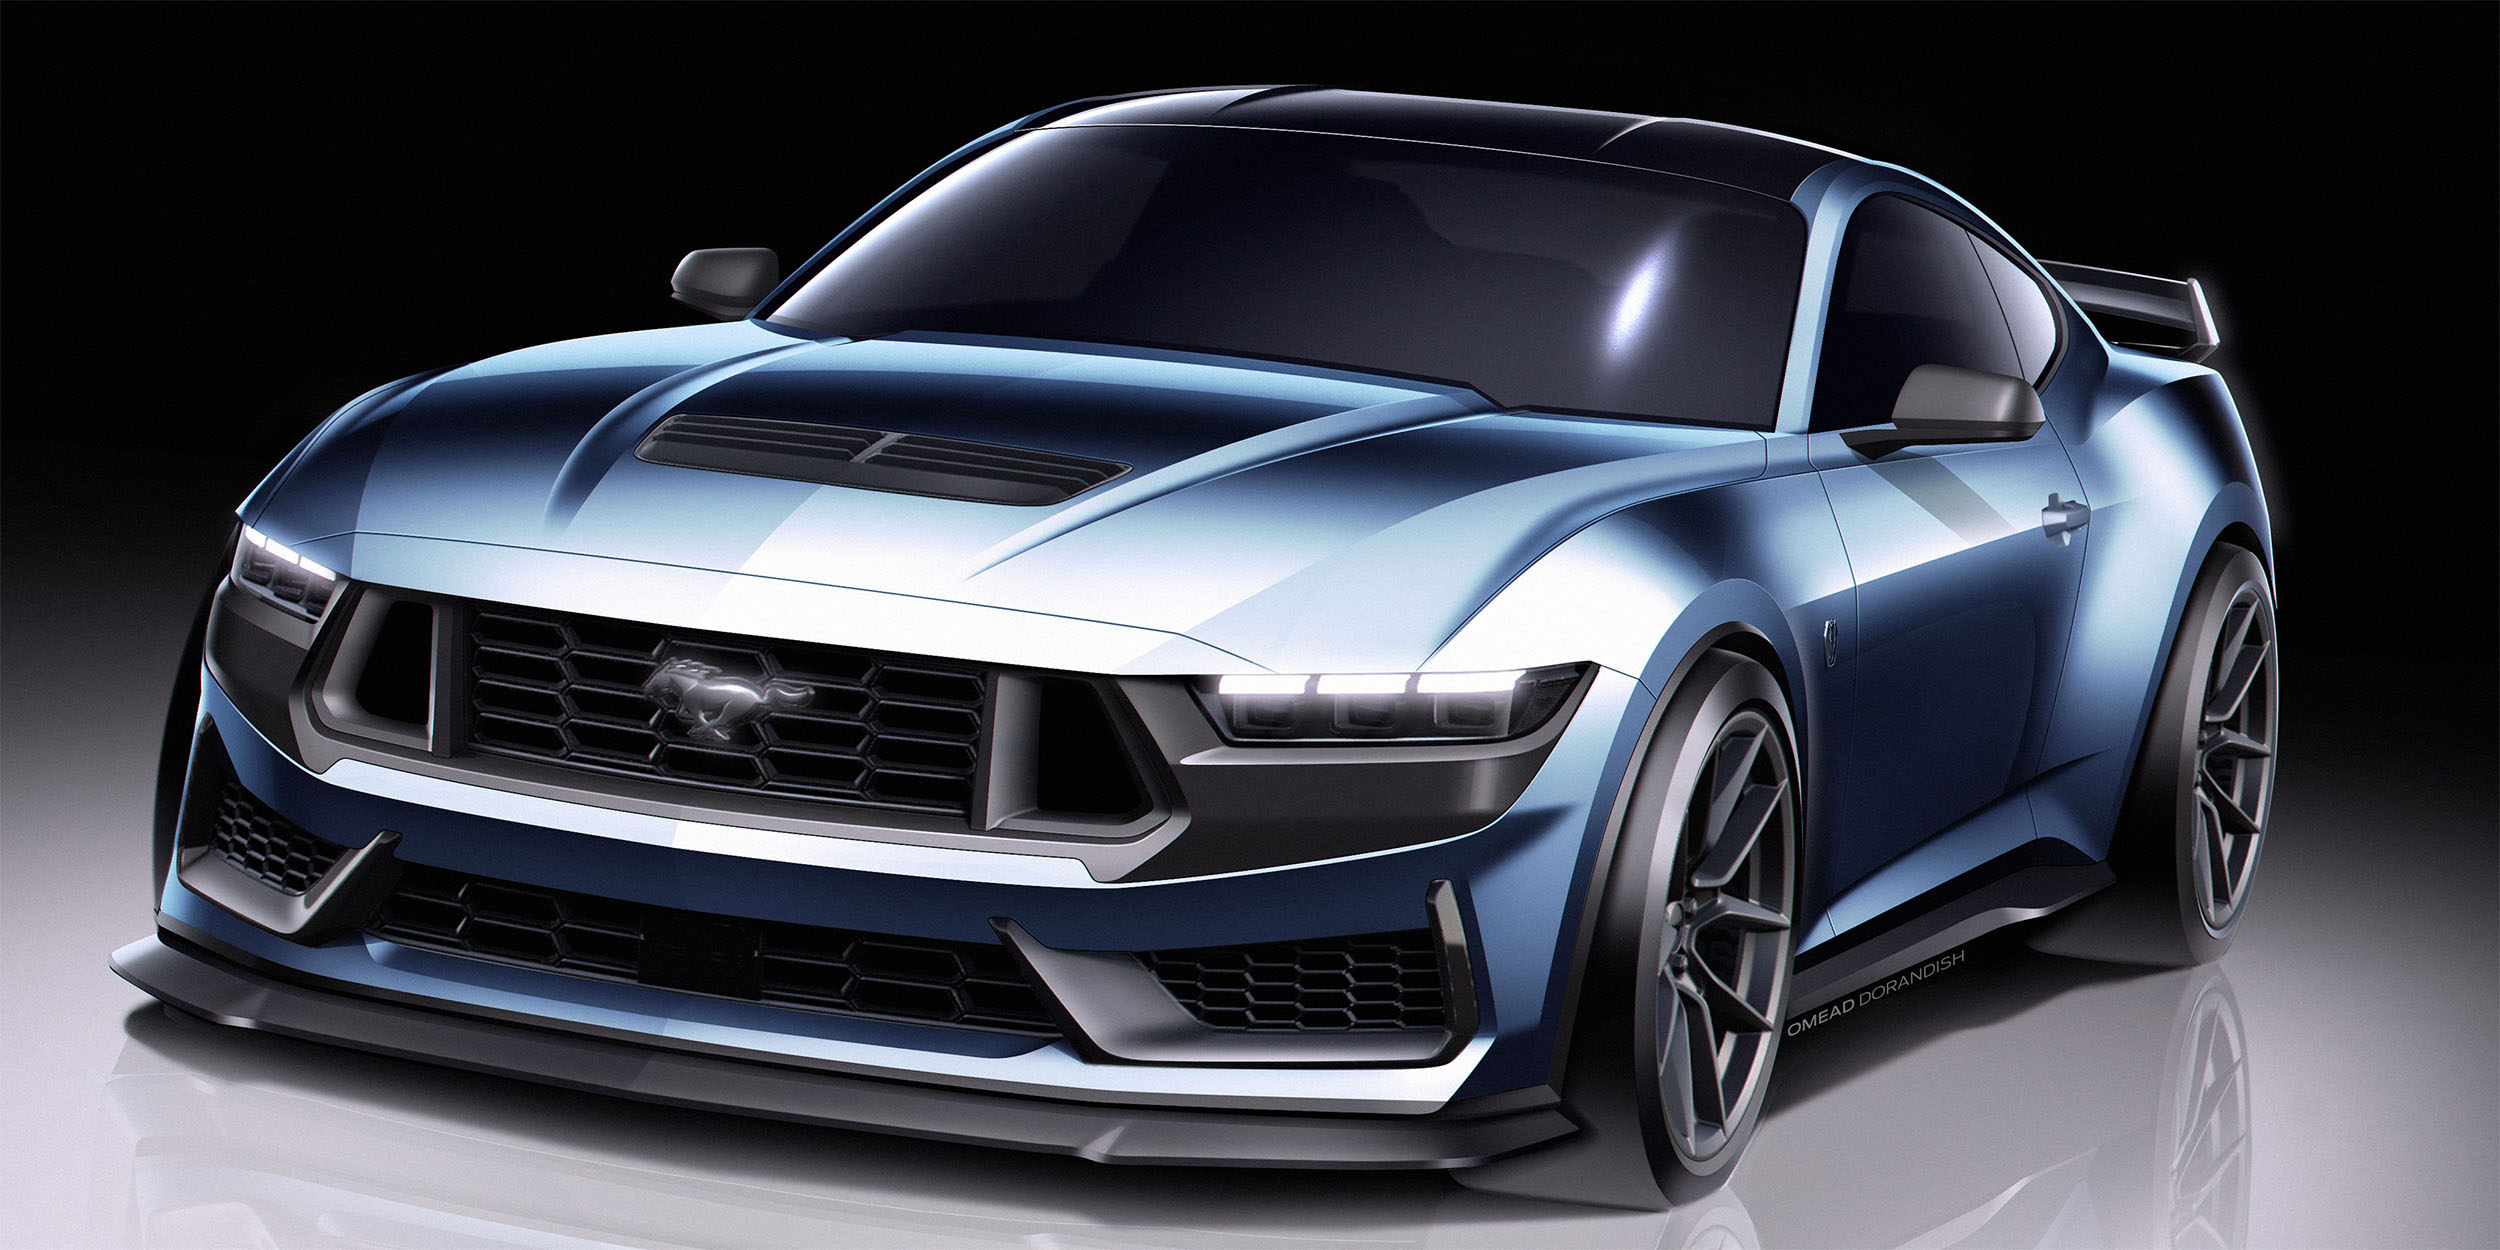 S650 Mustang Dark Horse Mustang in different colors sketches posted by Ford Performance dark horse mustang s650